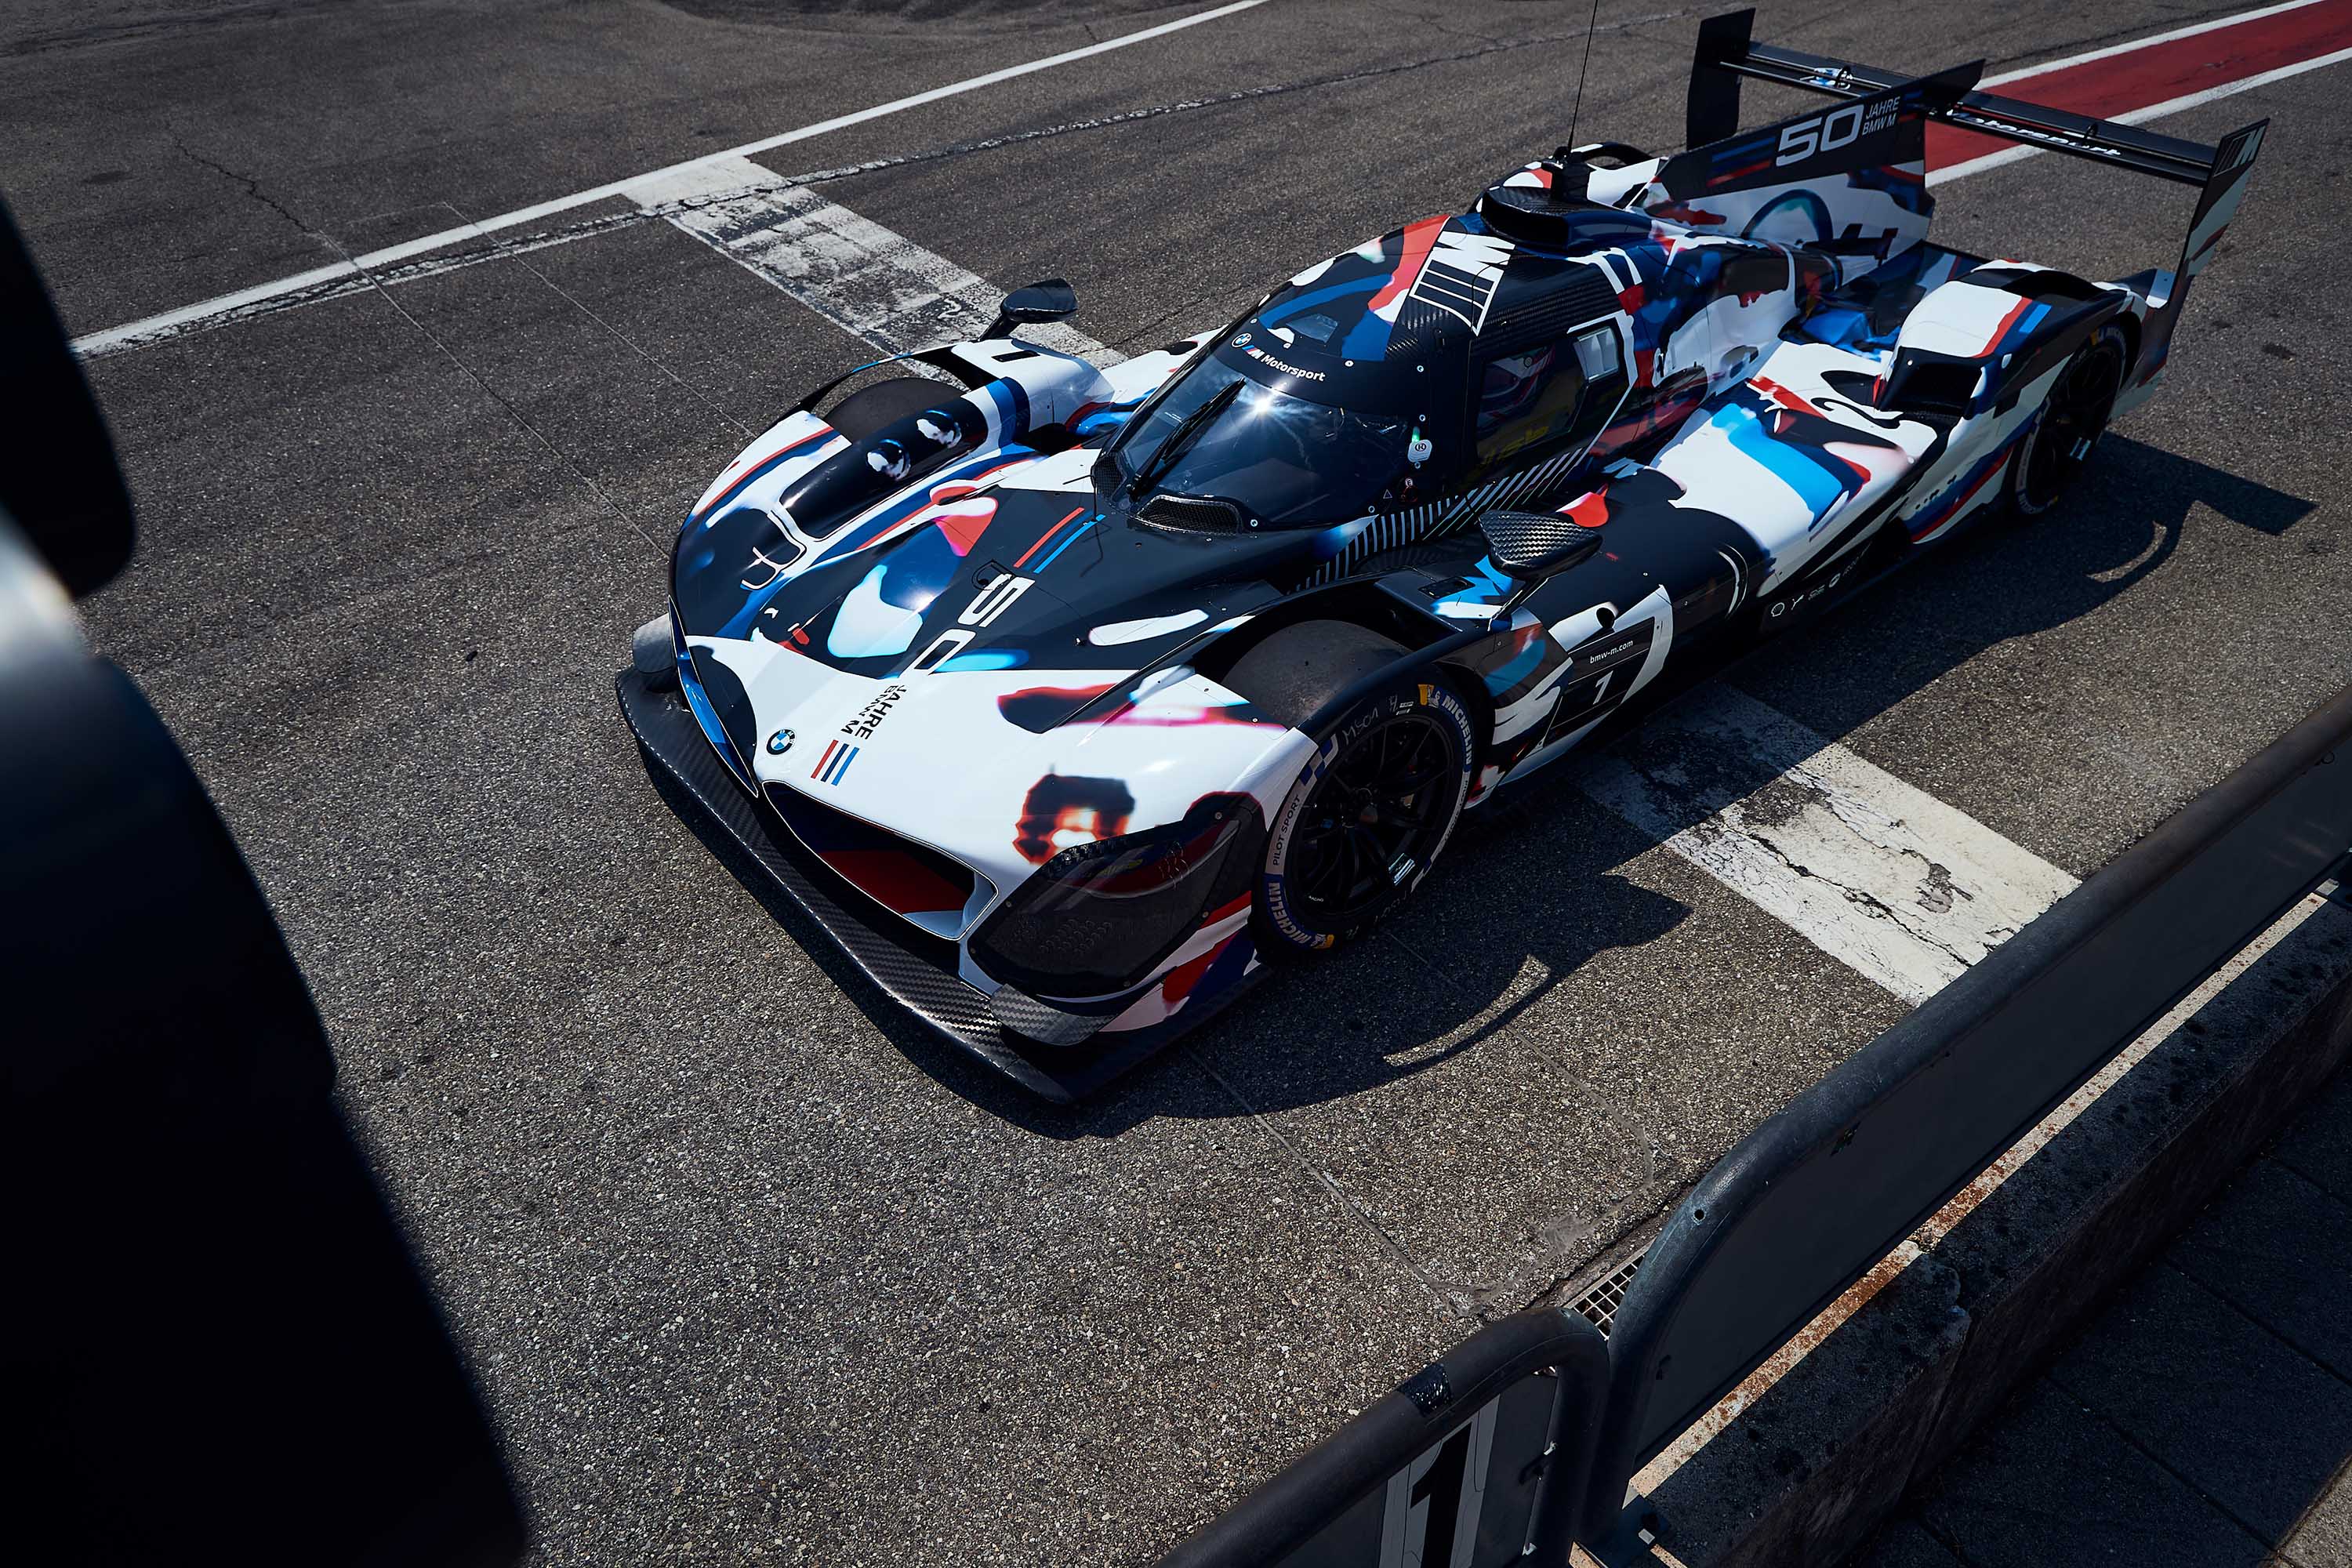 24 Hours of Le Mans BMW reveals plans to enter Hypercar in 2024 24h